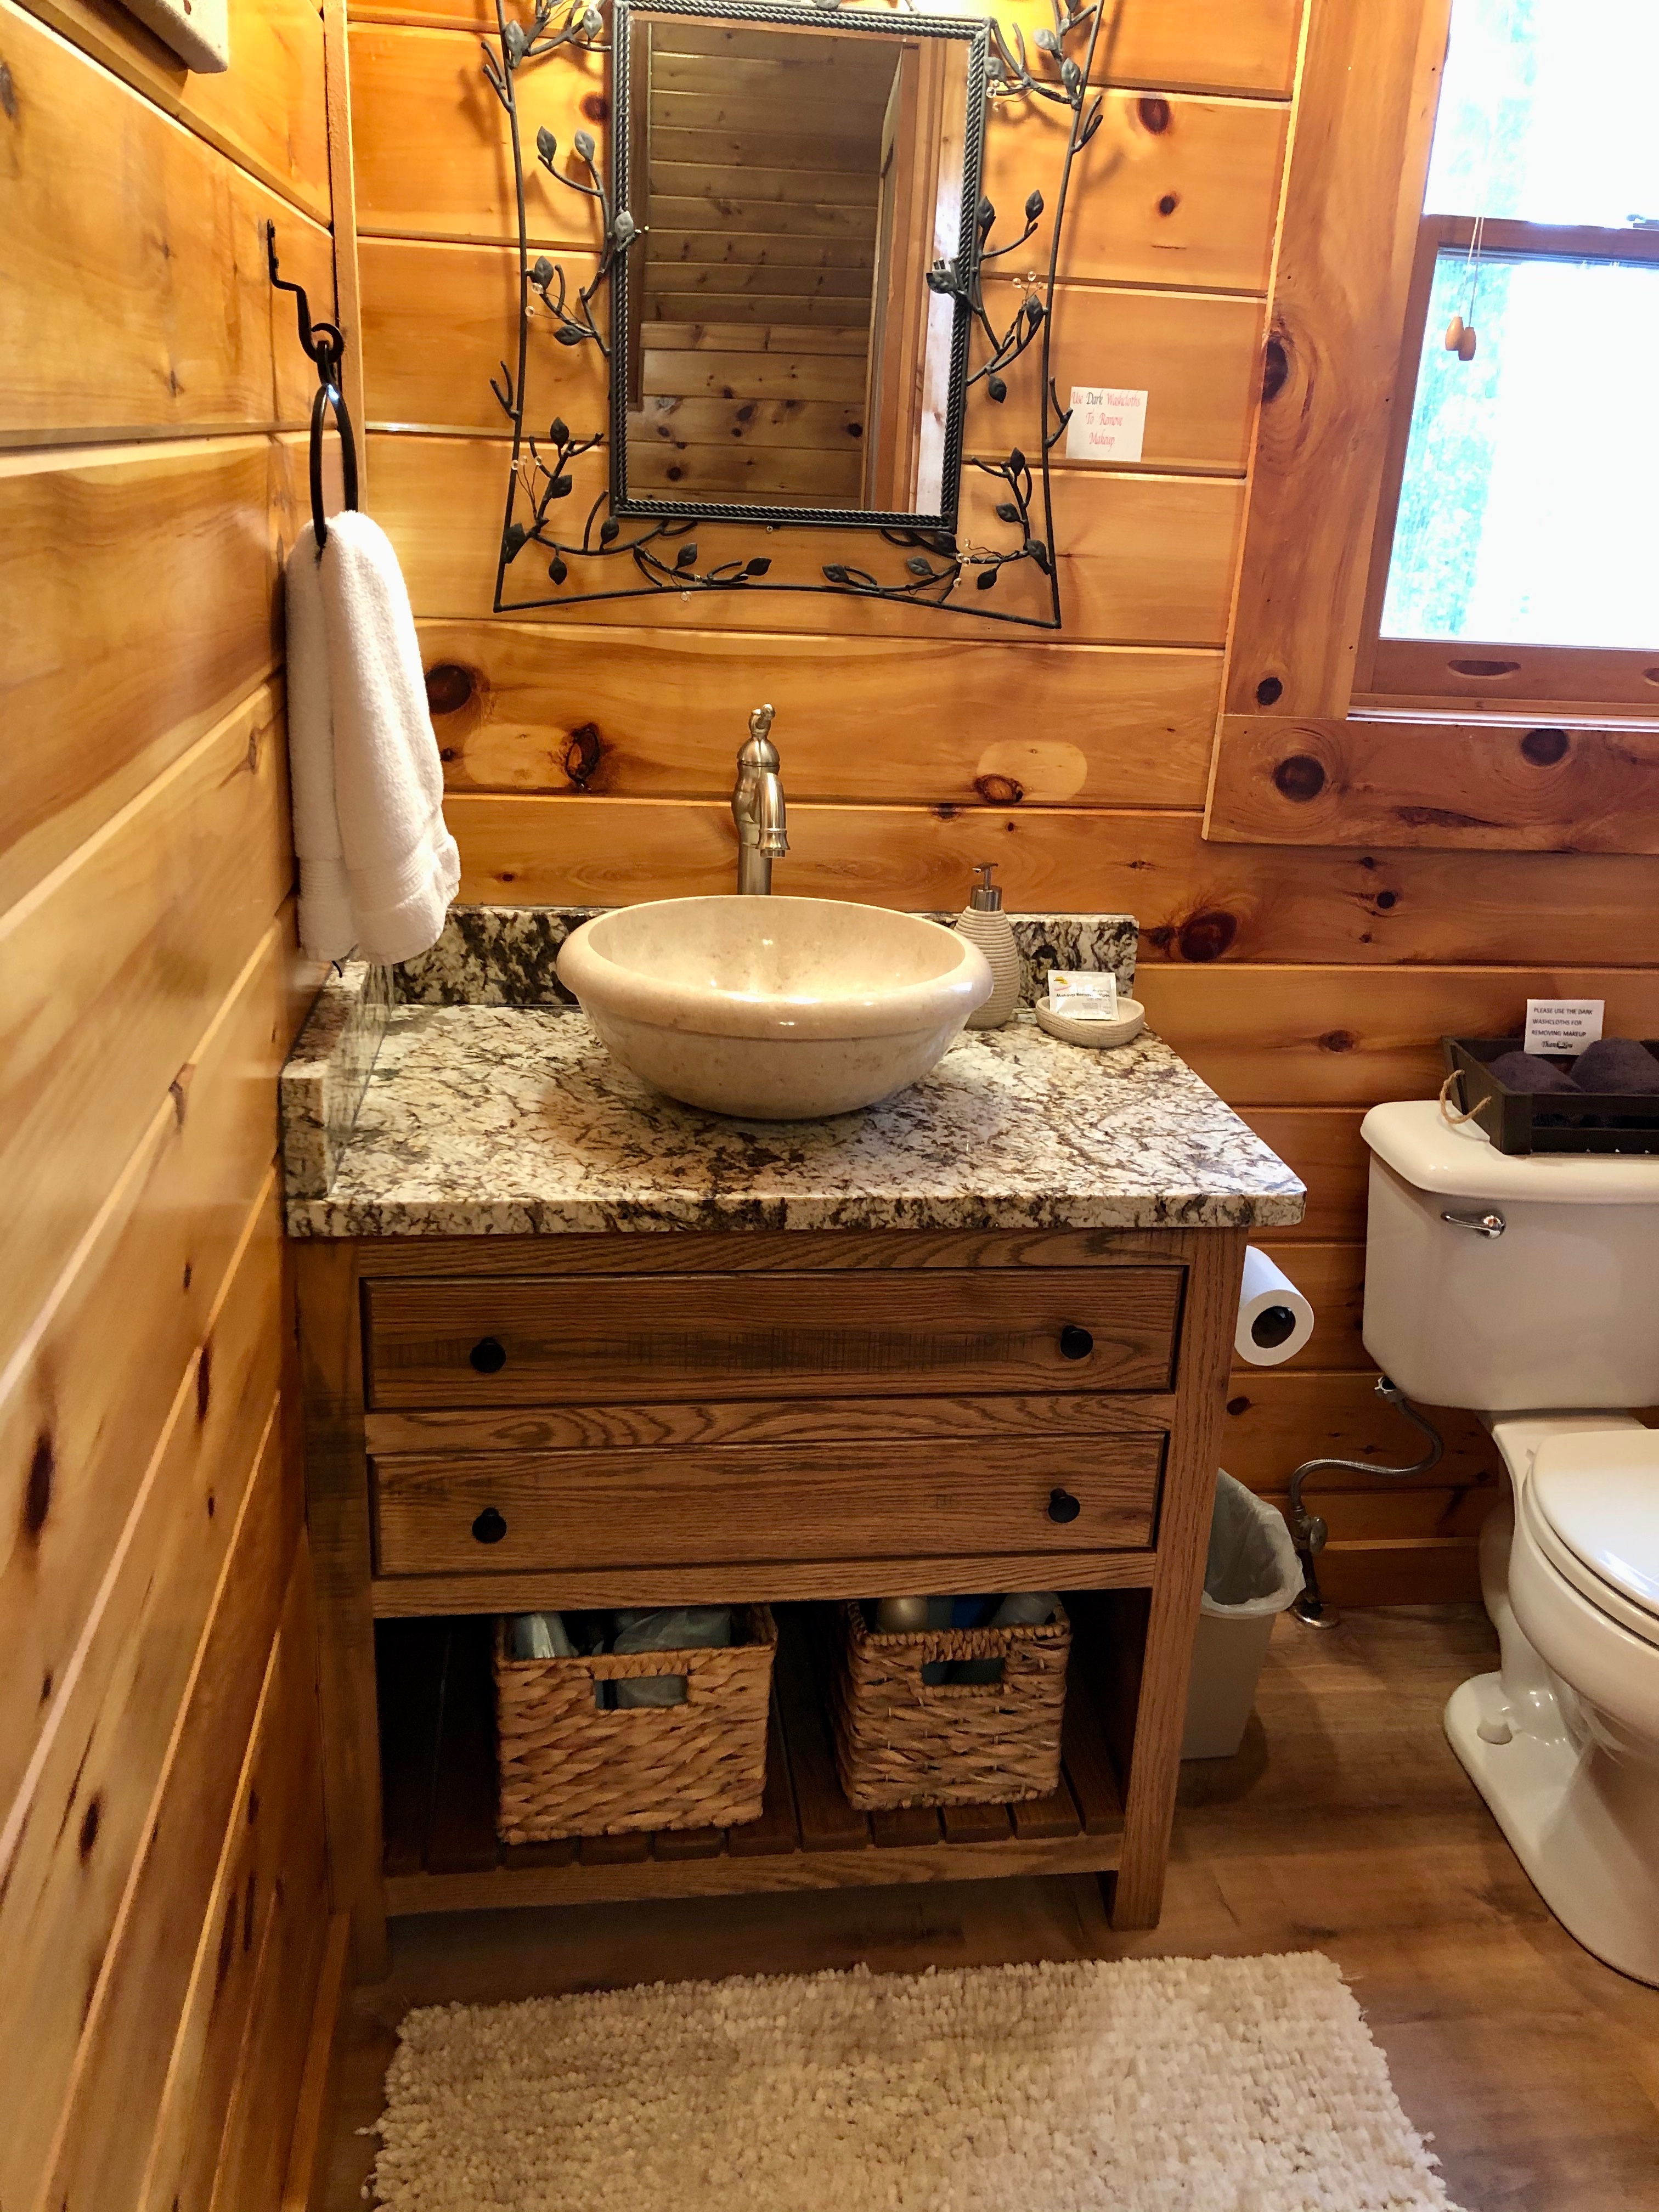 Remodeled upstairs bathroom (2/21) with locally made vanity and granite